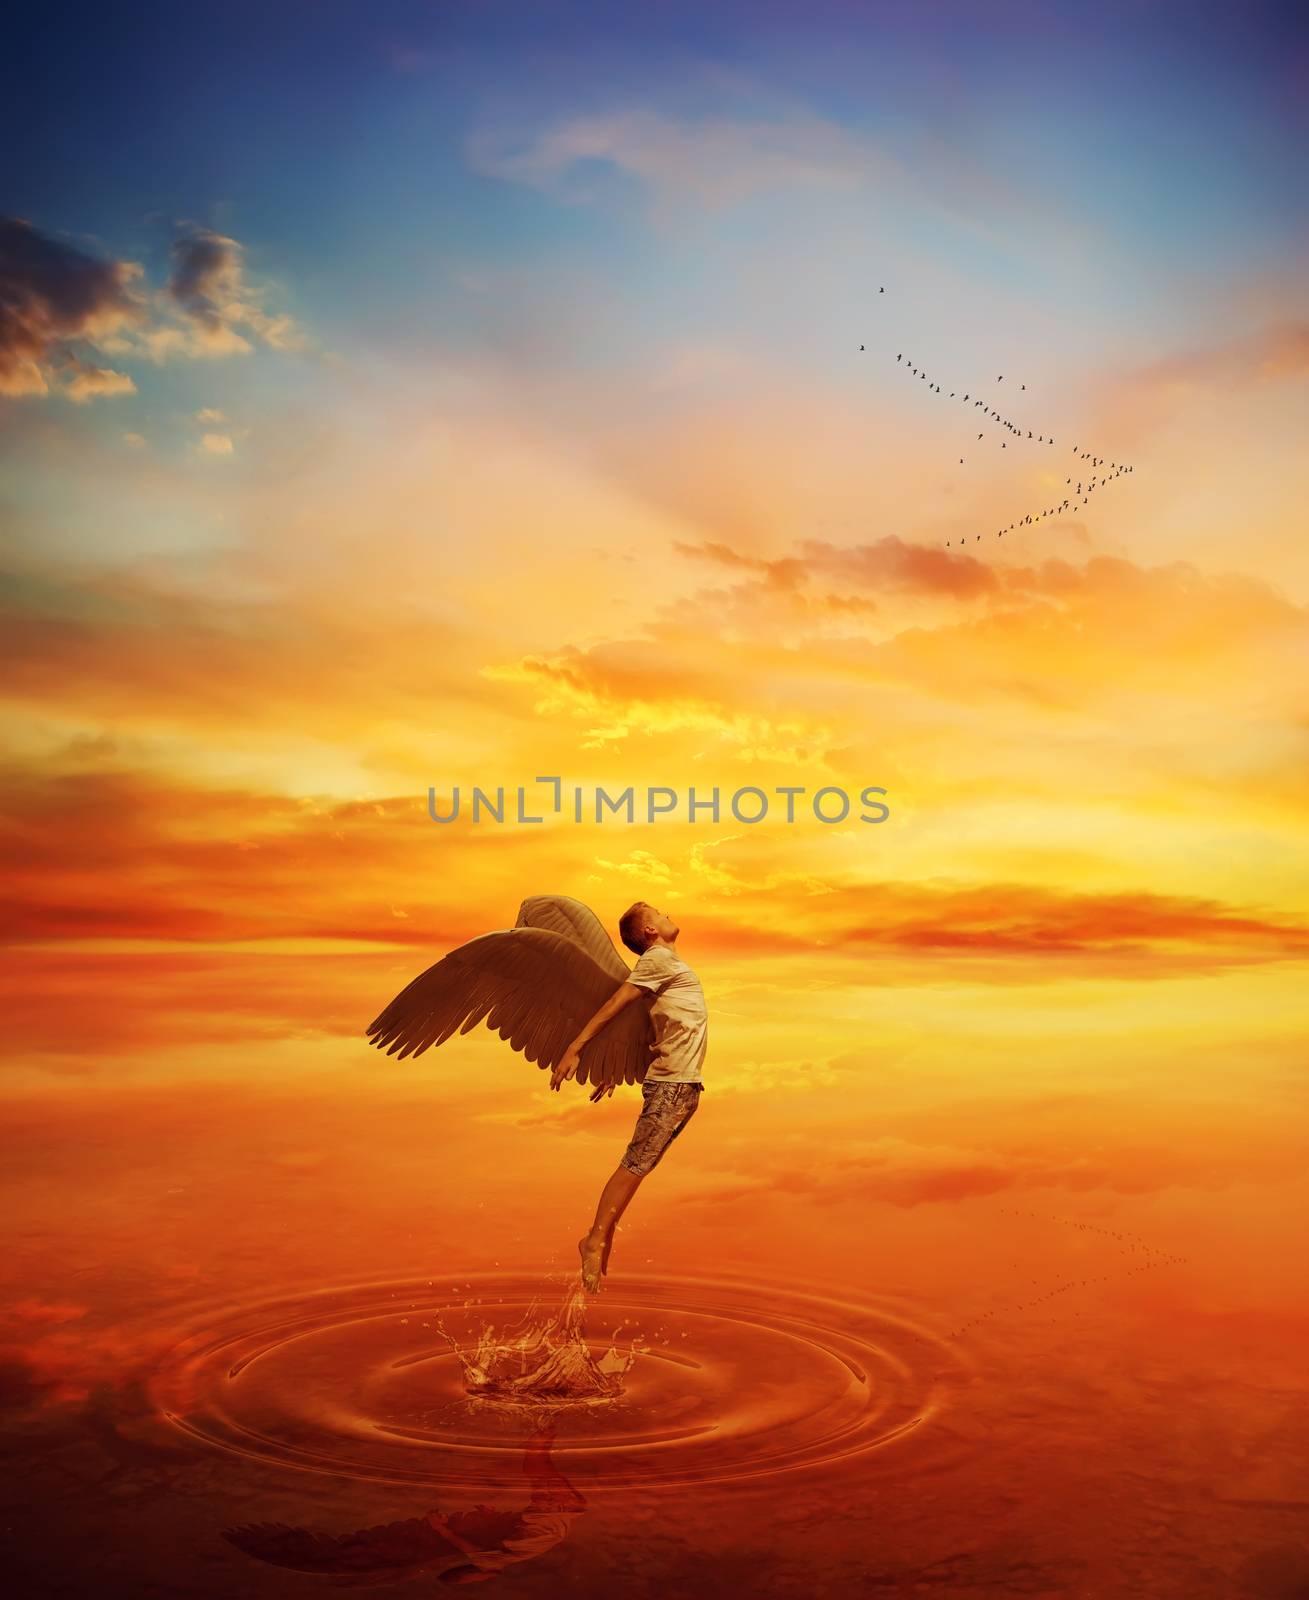 Surrealistic image as angel try to jump from the lake water and fly away. Great spiritual escape over a paradise sunset background.